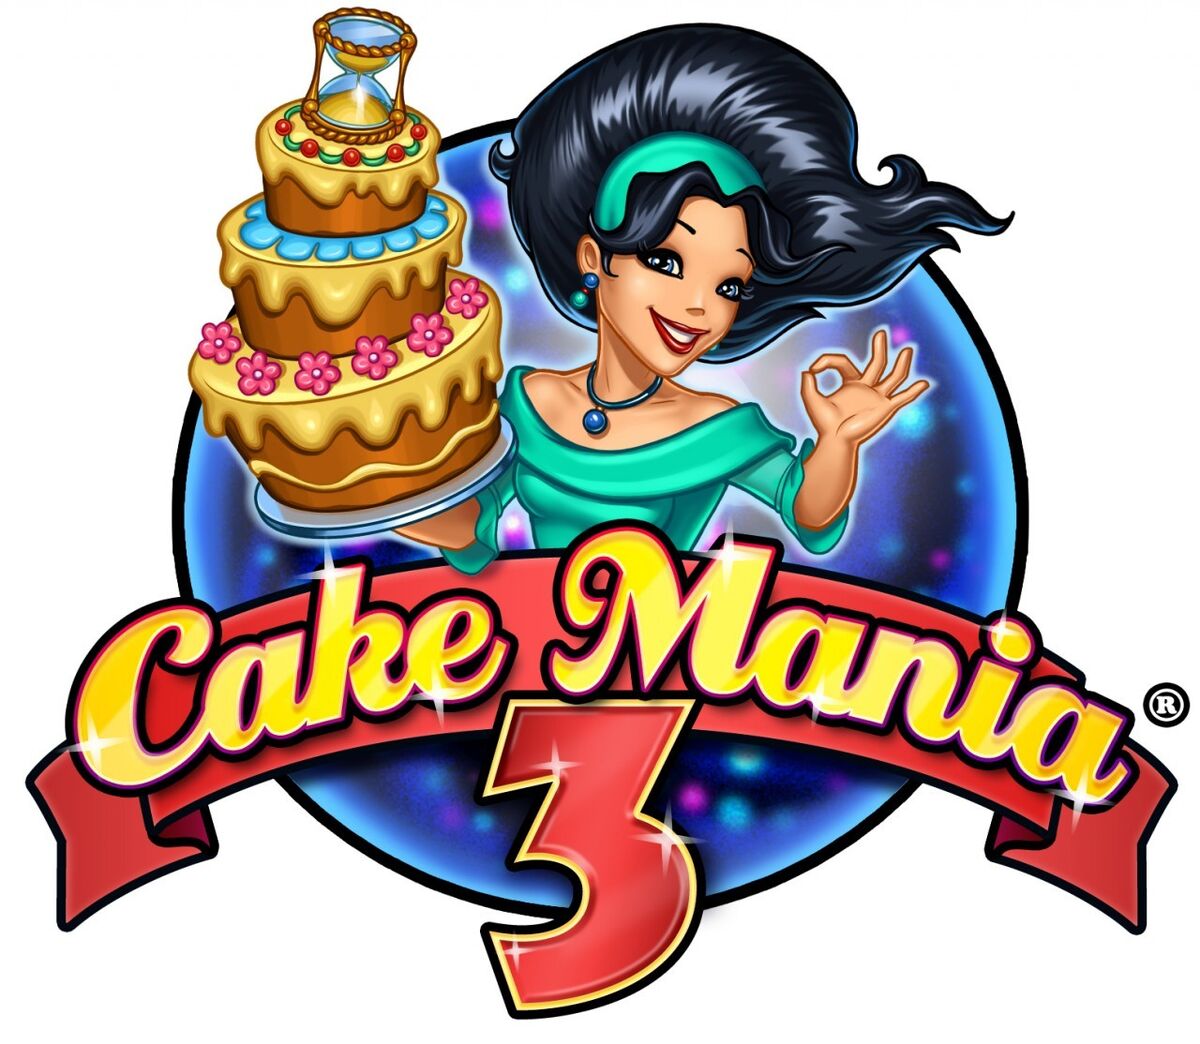 Cake Mania Updates: Download Cake Mania Game for Windows 7/10/11 for Free